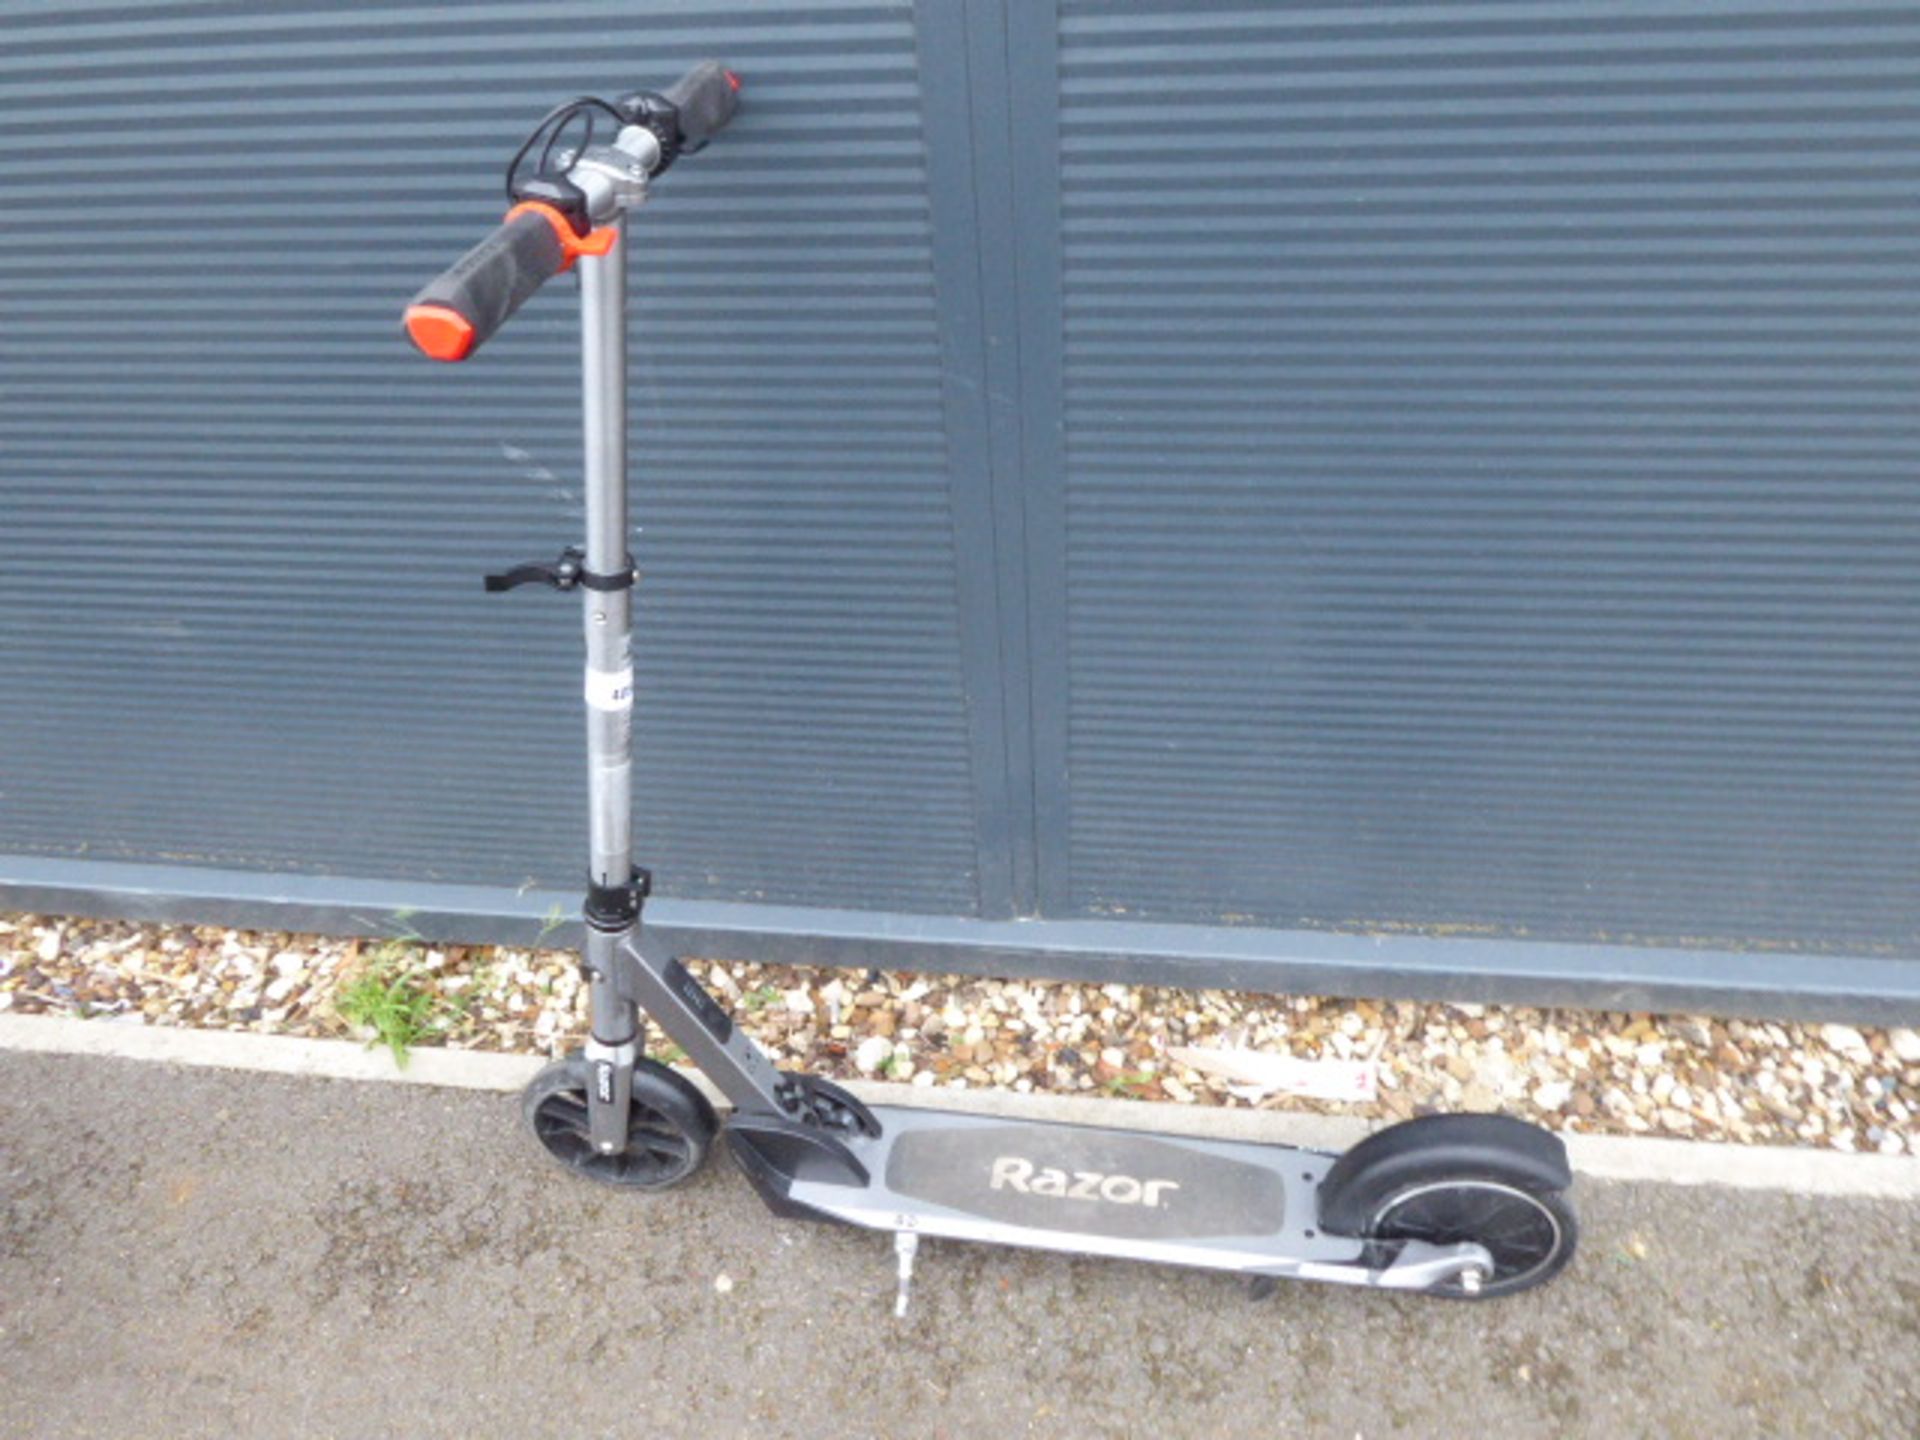 Razor electric scooter (no charger)